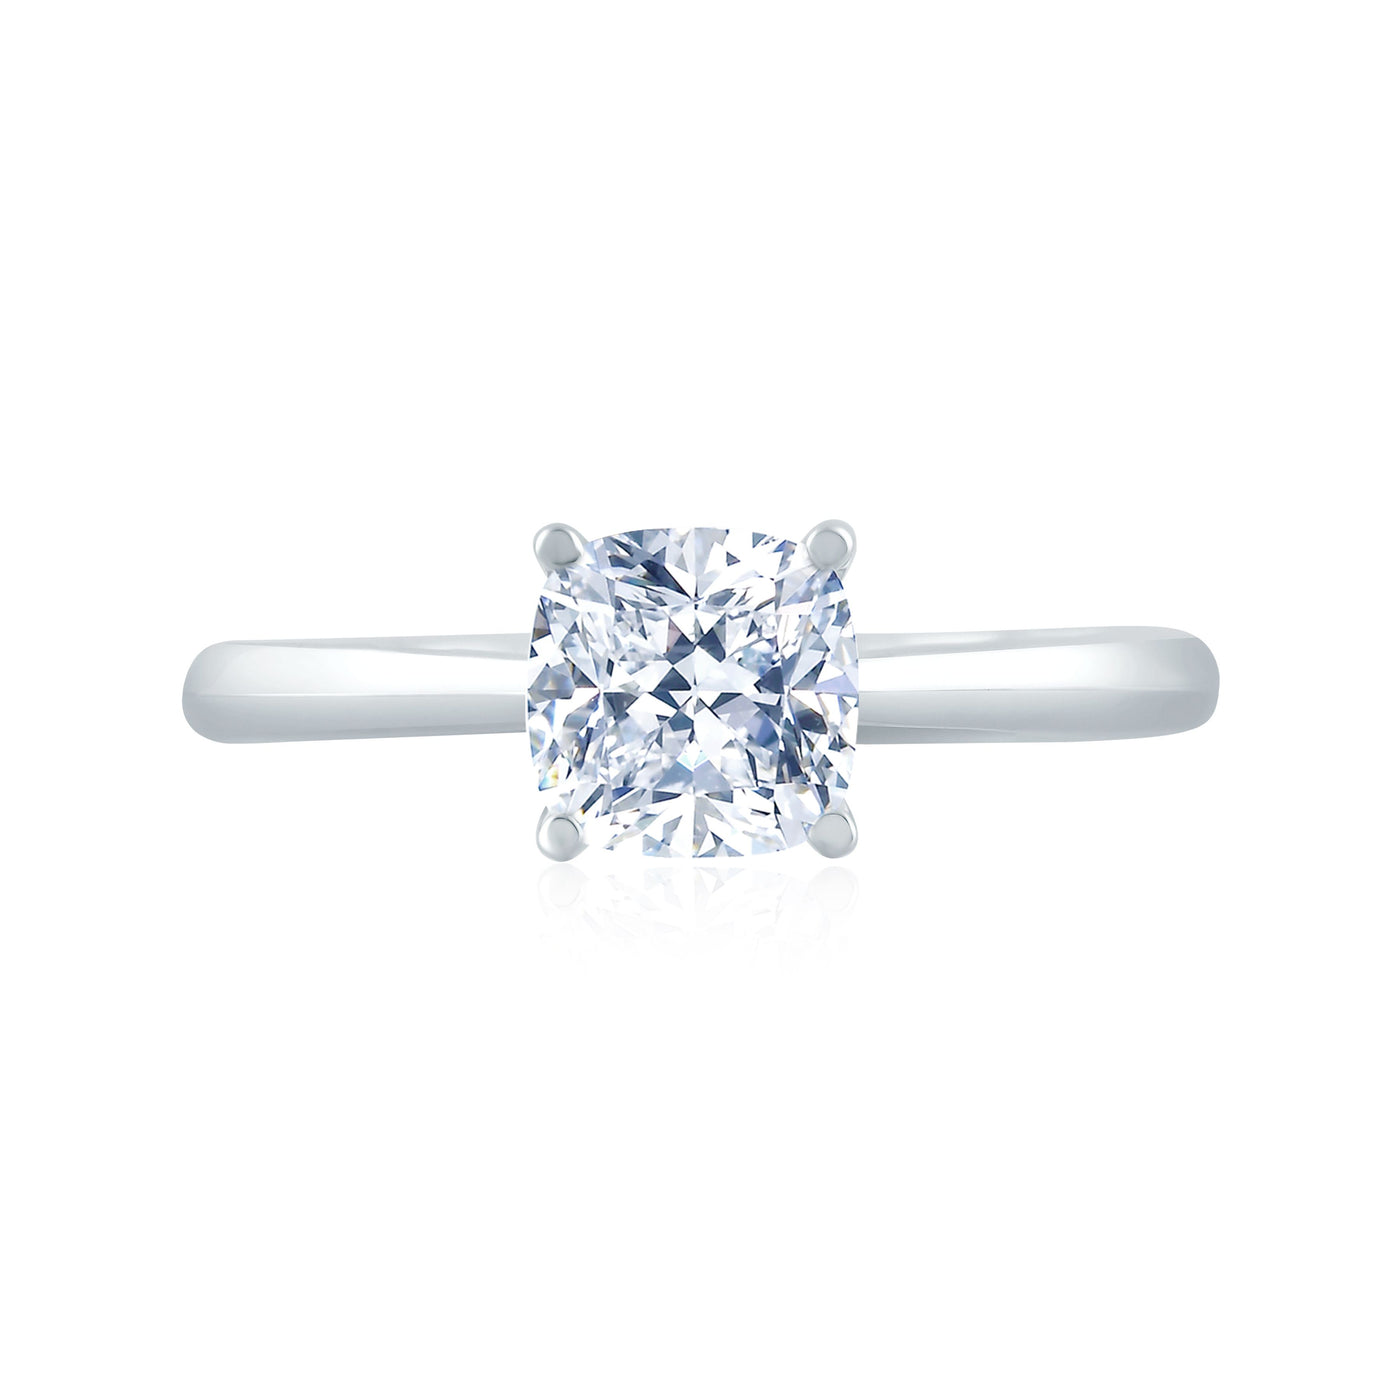 Peek-A-Boo Pave Profile Cushion Center Diamond Quilted Engagement Ring